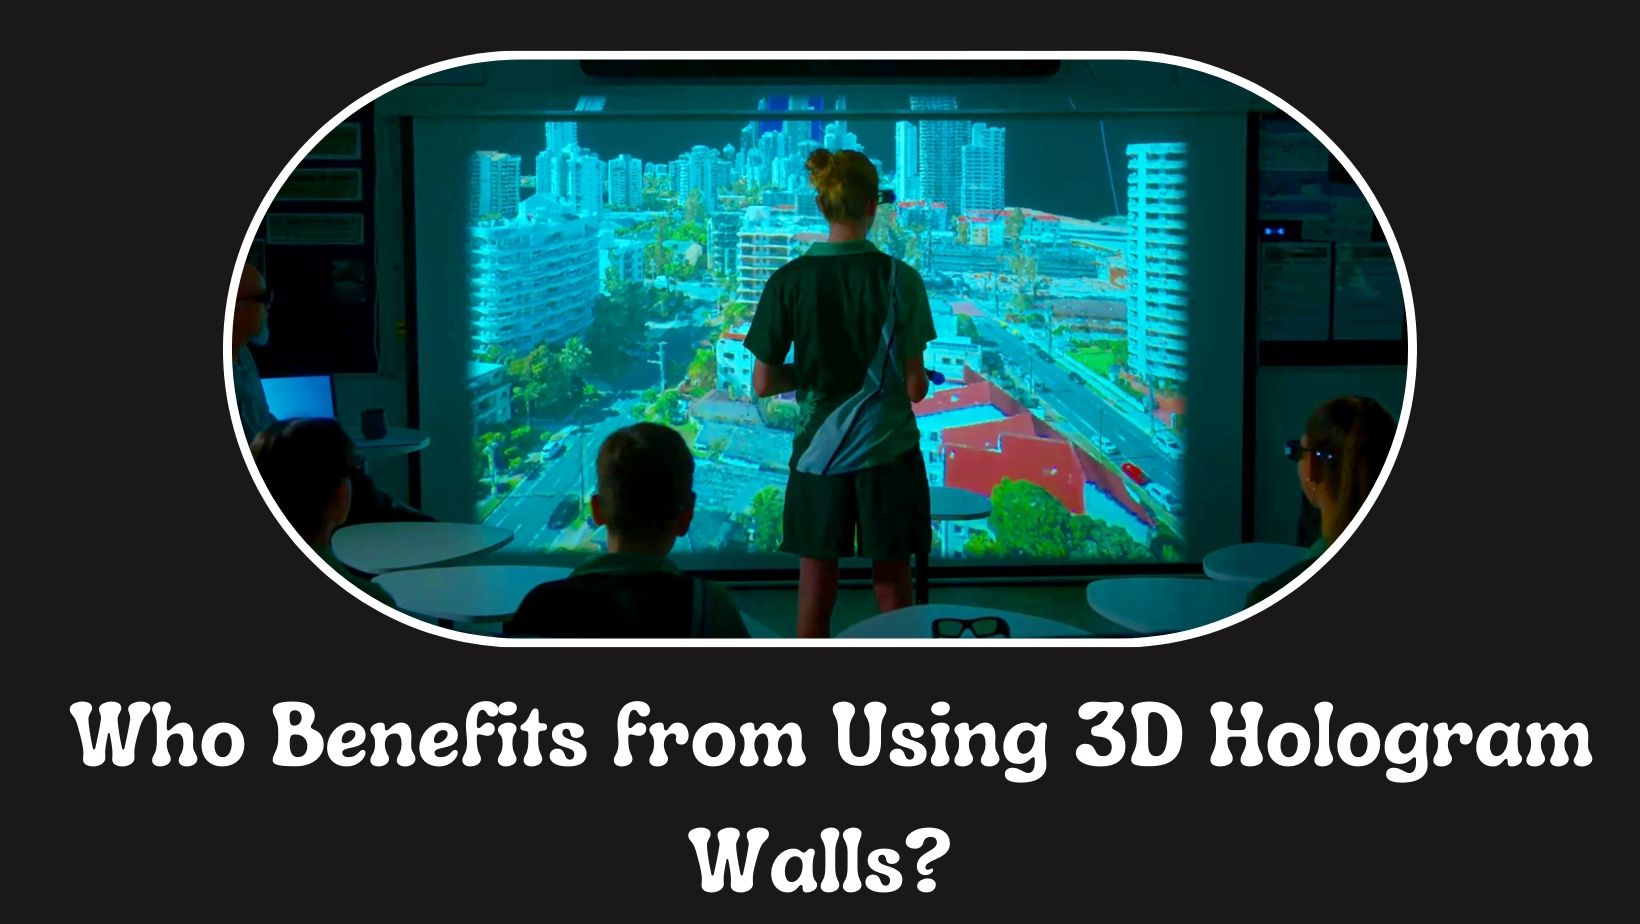 Who Benefits from Using 3D Hologram Walls?